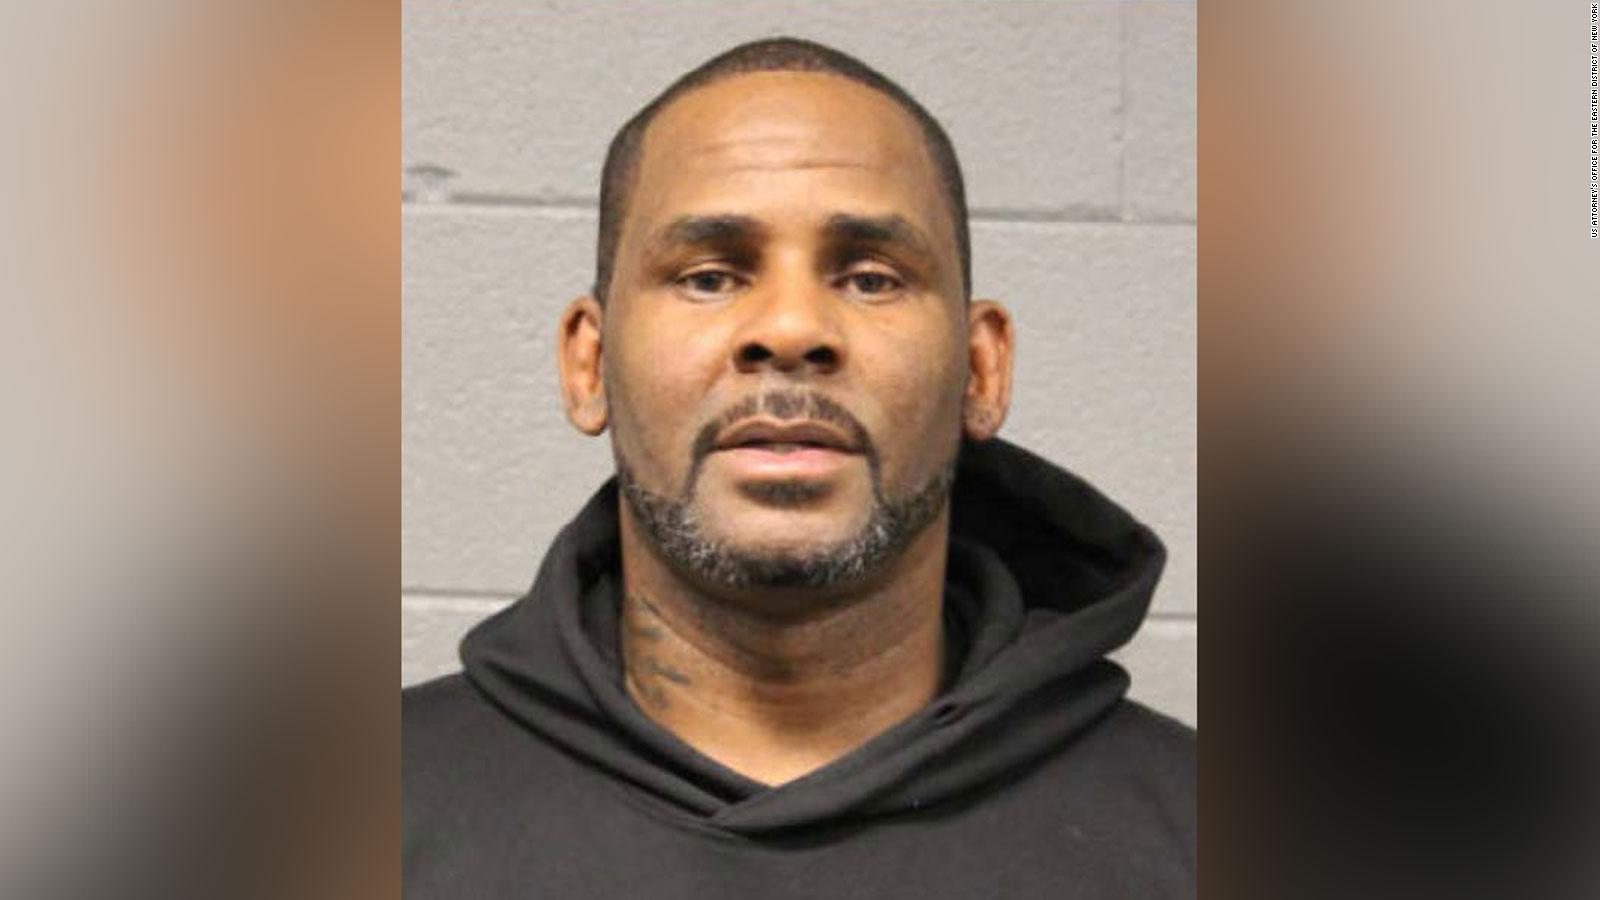 R Kelly Trial Physician Kris Mcgrath Testifies The Singer Had Herpes Since At Least 2007 As